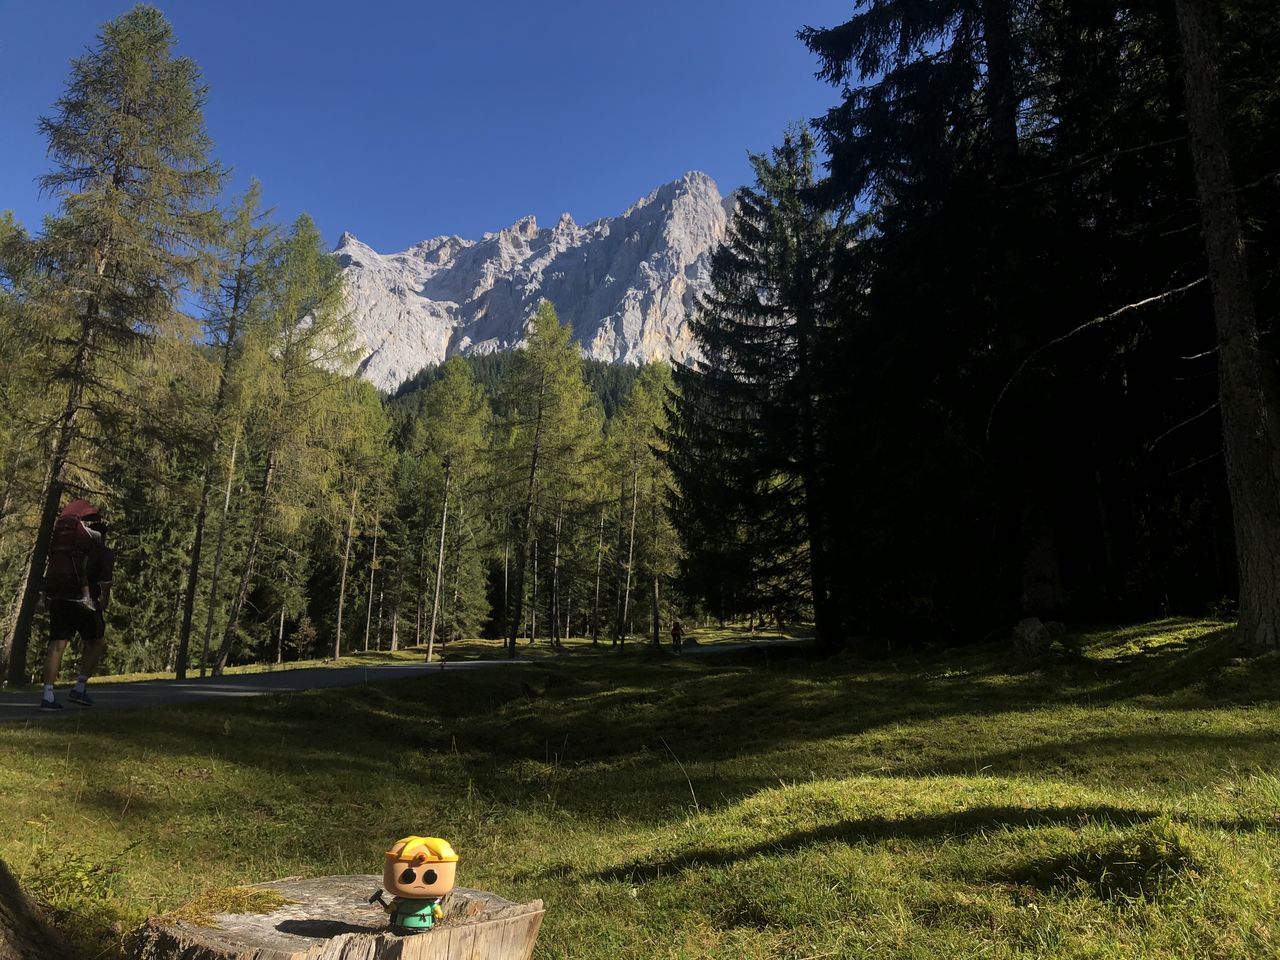 Magic in the Alps Hike Hiking Leaves 🍁 South Park Funkopop Funko Autumnal Autumn Collection Autumn Colours Photograph Photo Plush Toy Stuffed Toy Merchandise Zugspitze Austria Austrian Alps Wilderness Mountain Leisure Activity Mountain Range